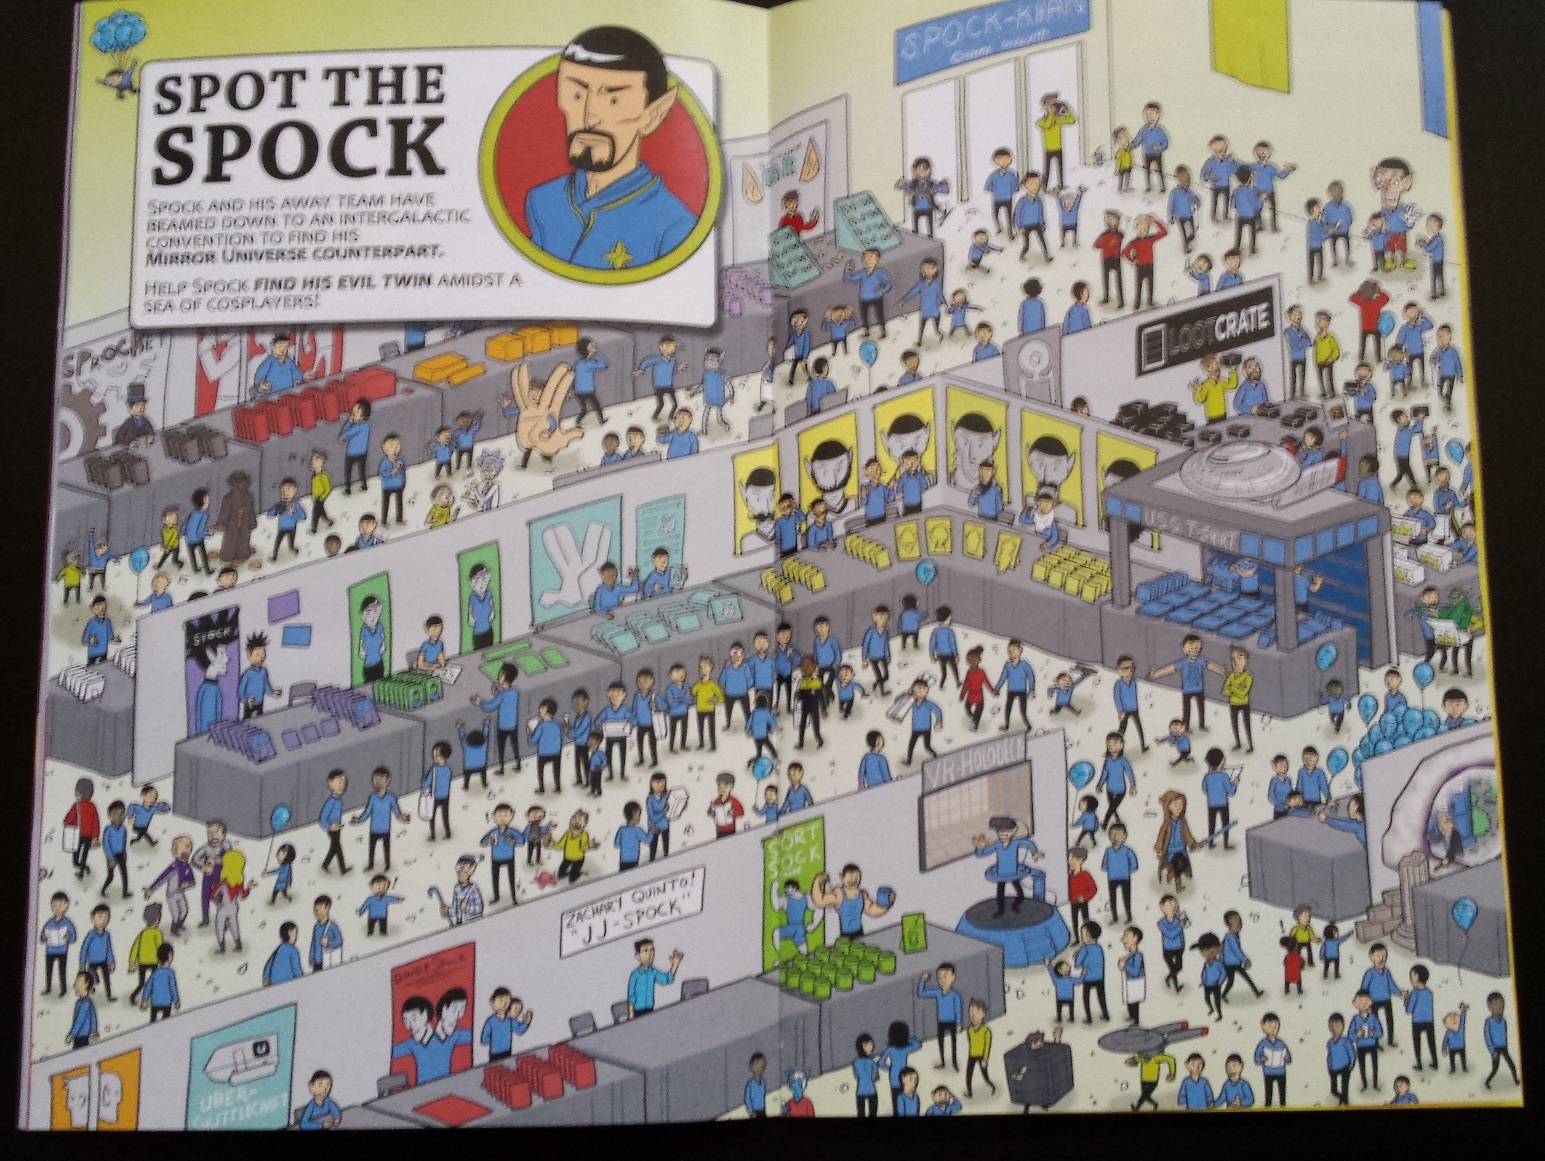 Loot crate magazine, loot crate versus, spot the spock